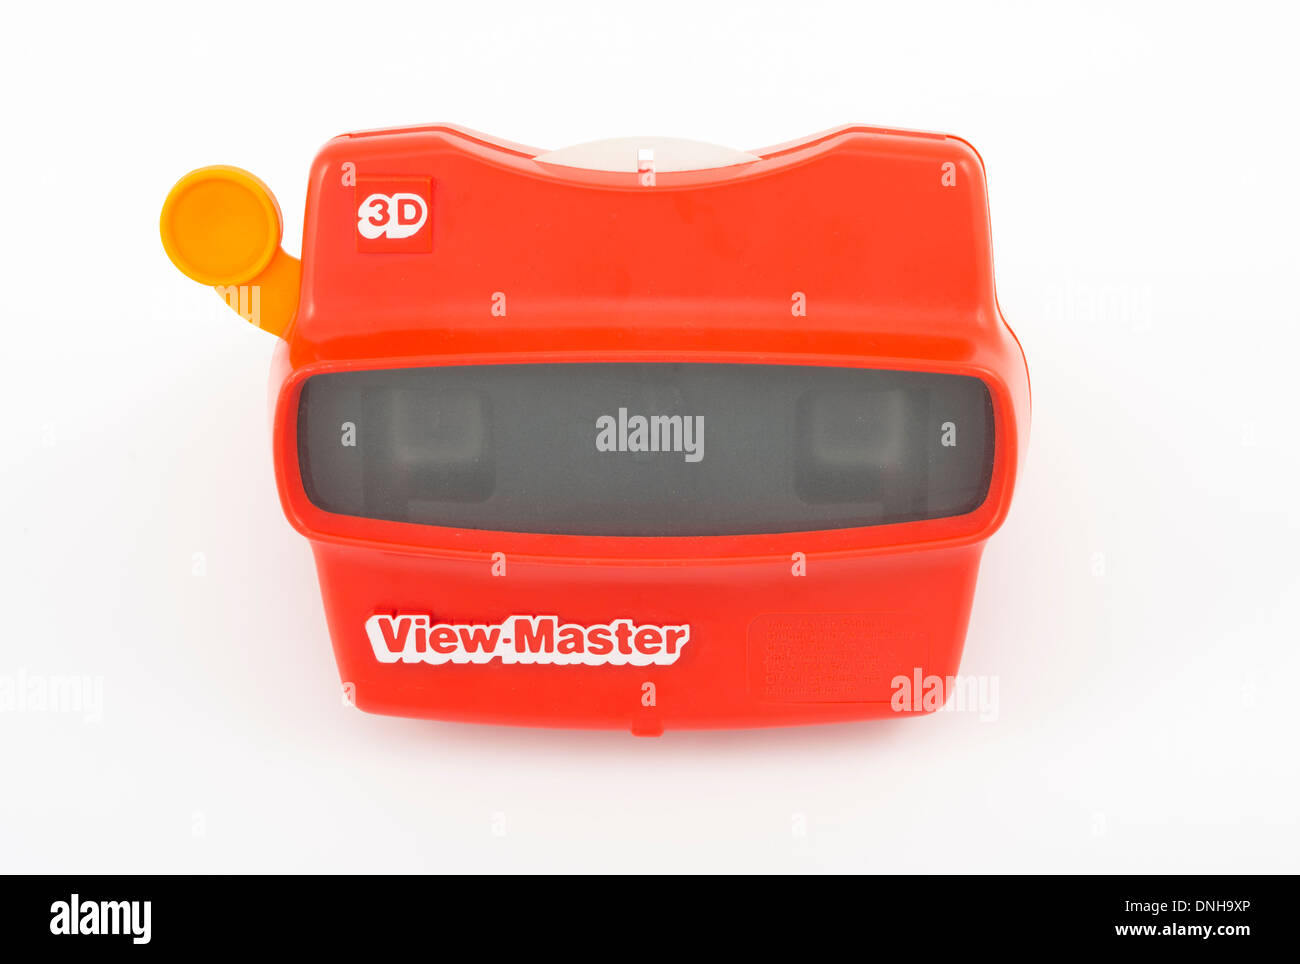 View-Master stereoscopic 3-D viewer Stock Photo